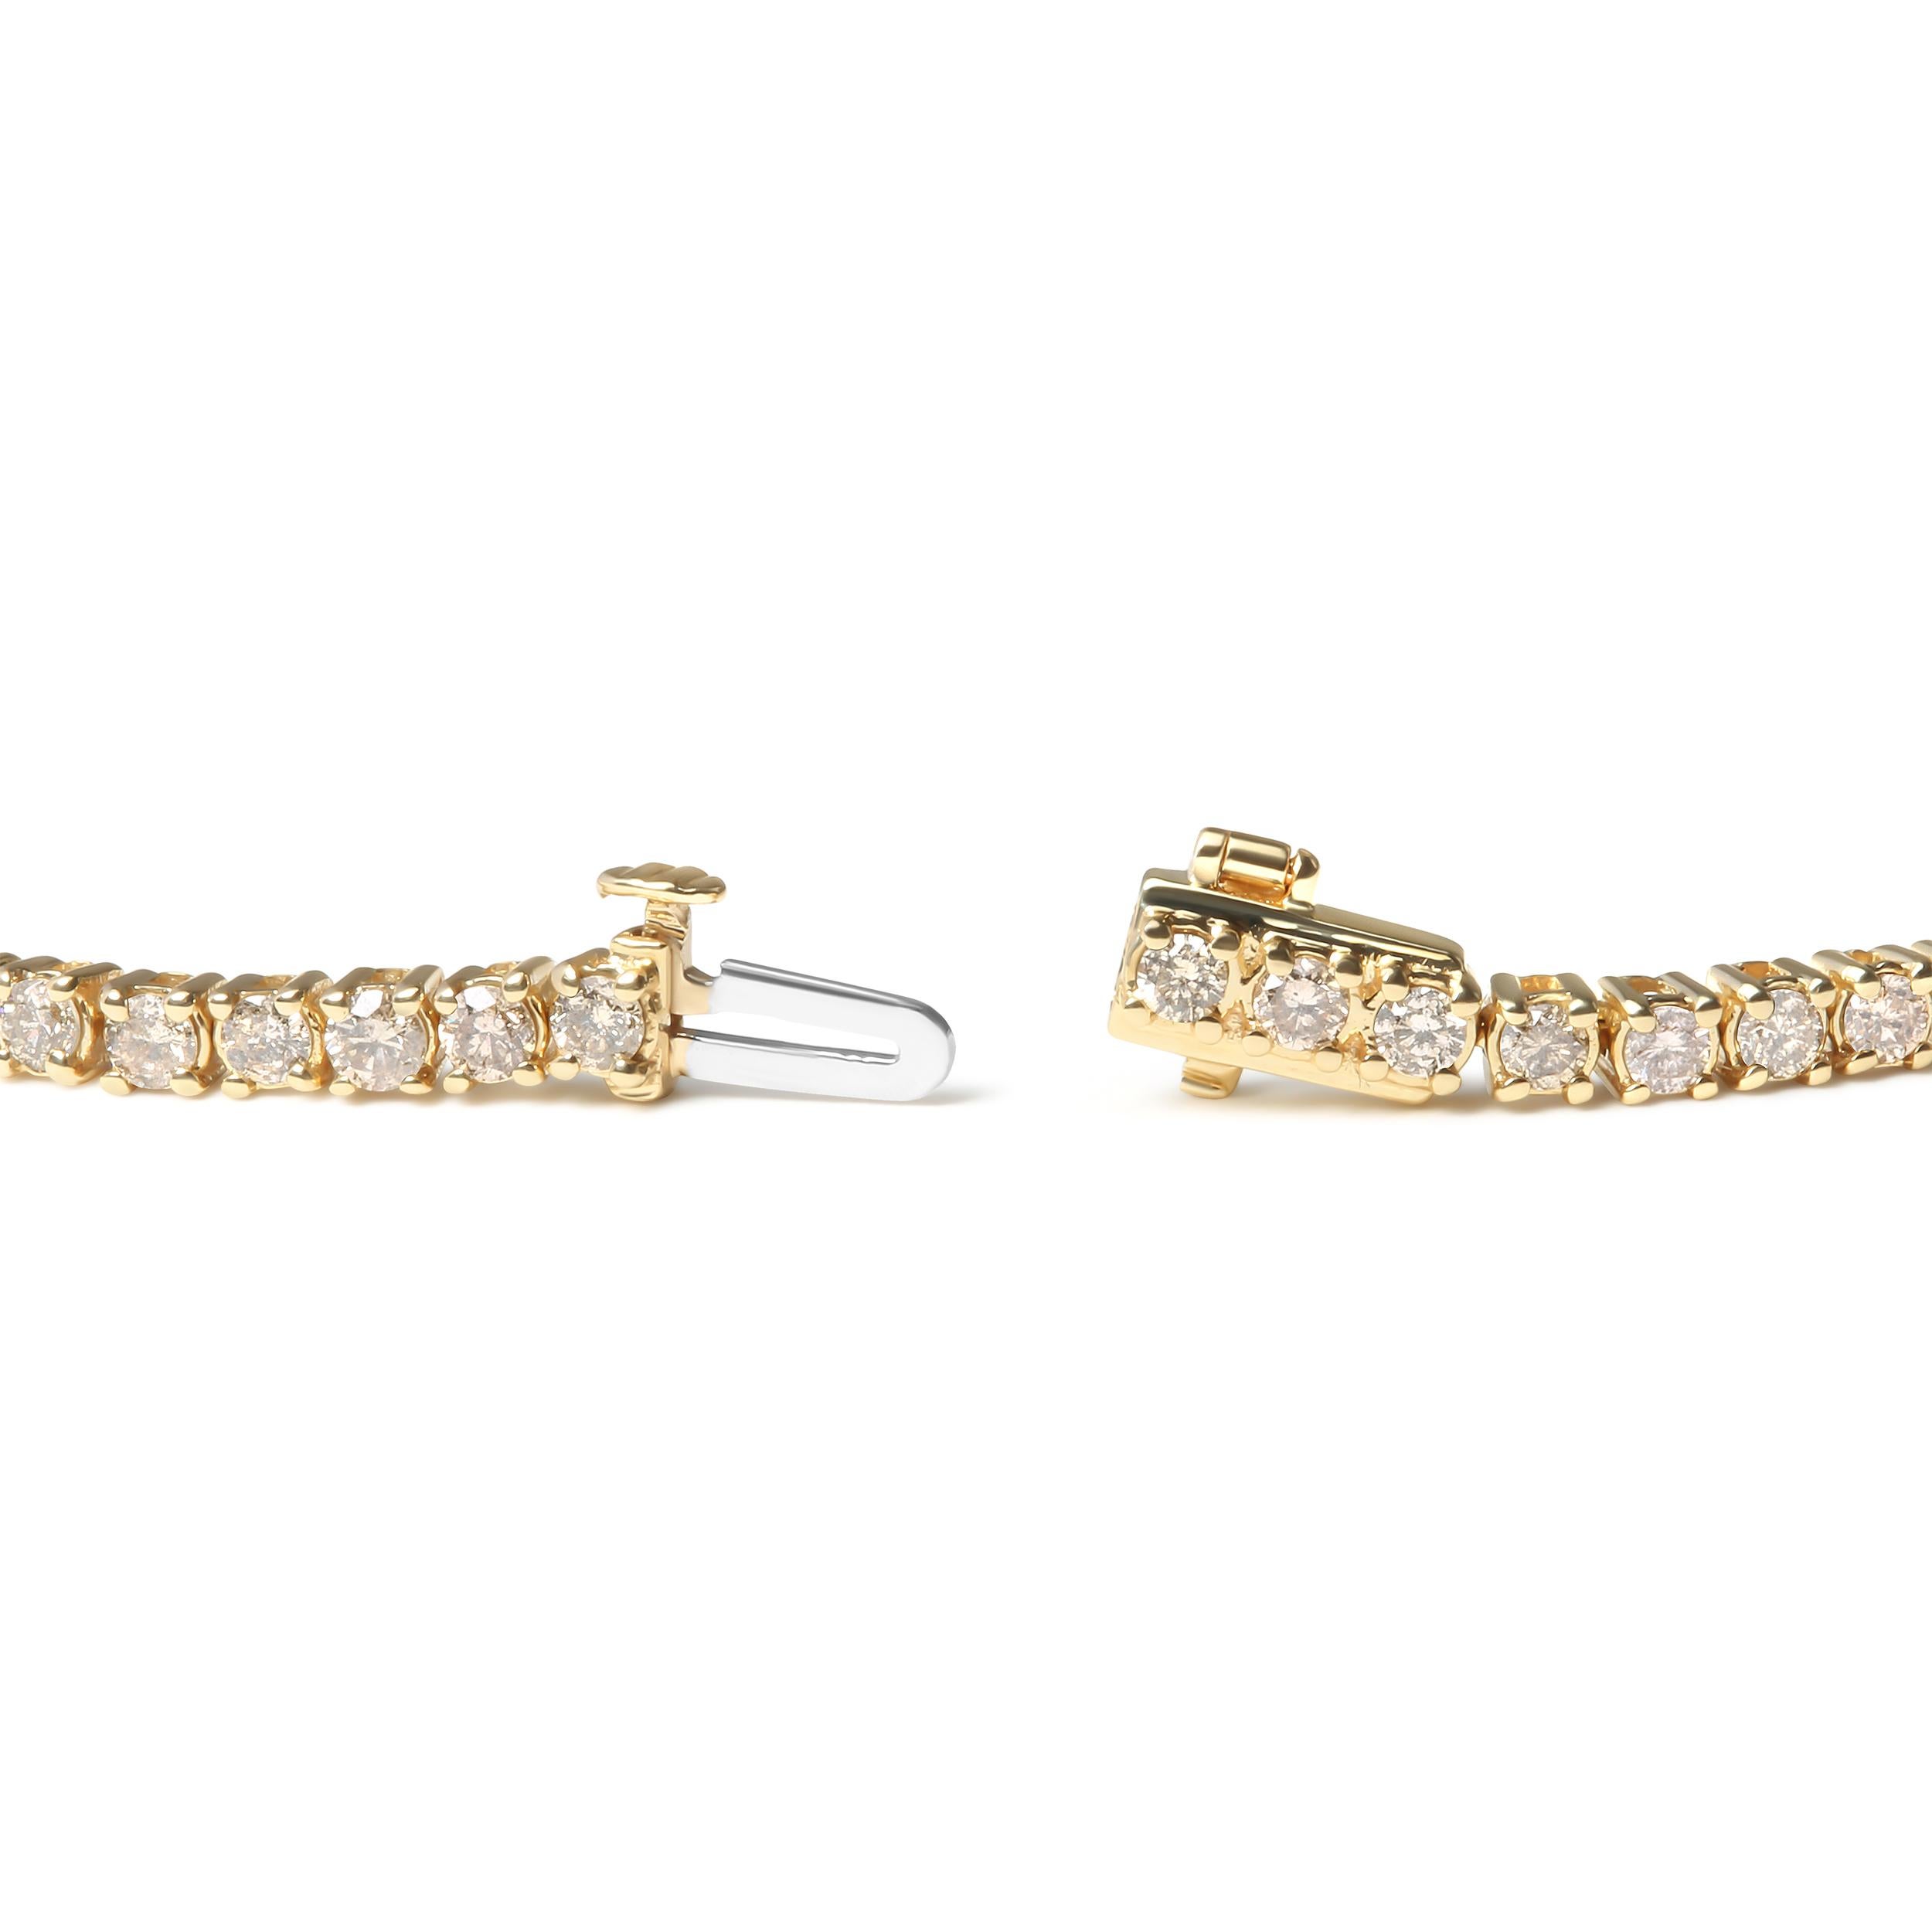 Introducing our stunning 14K yellow gold 3.00 Cttw round brilliant-cut diamond tennis bracelet! This piece features a beautiful array of 65 natural diamonds, totaling 3.0 Carats, all perfectly prong-set to create a stunning and continuous sparkle on